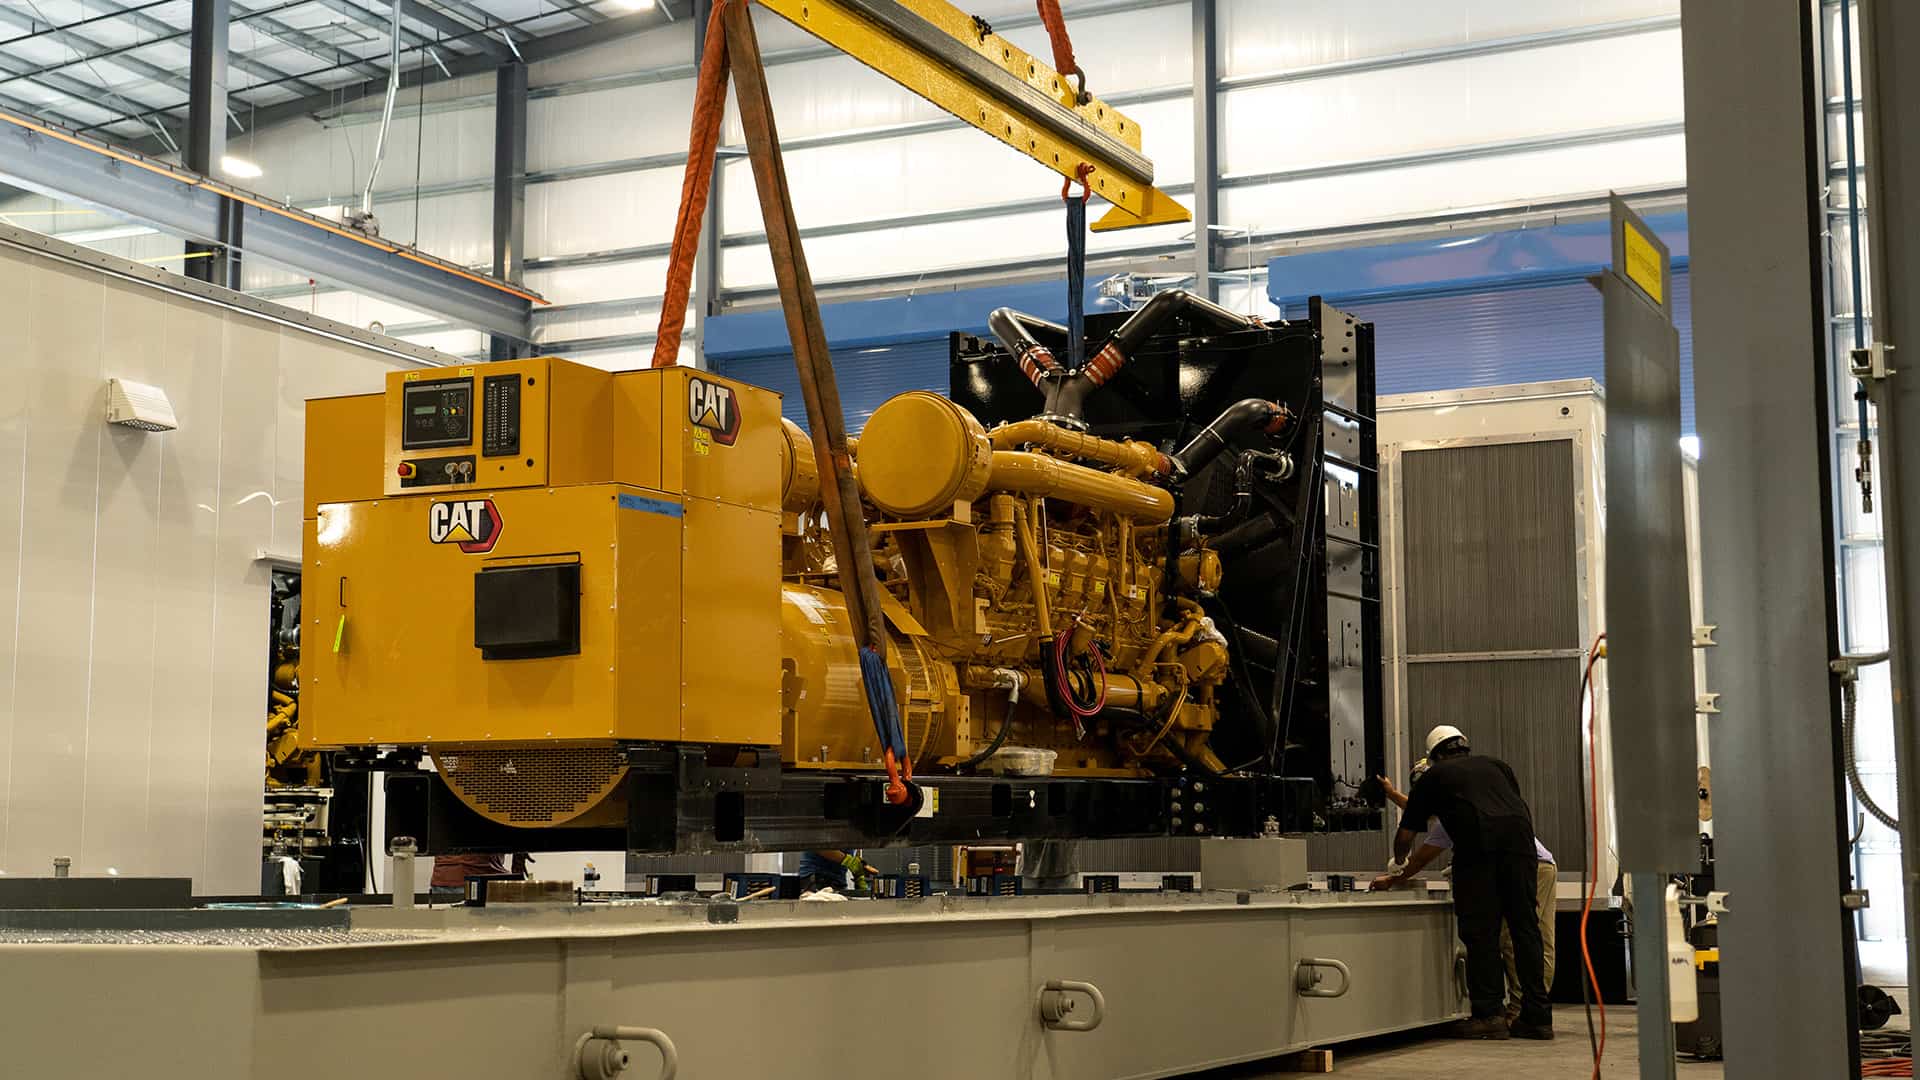 CAT power generator being crane lifted to base tank Acoustical Sheetmetal Company